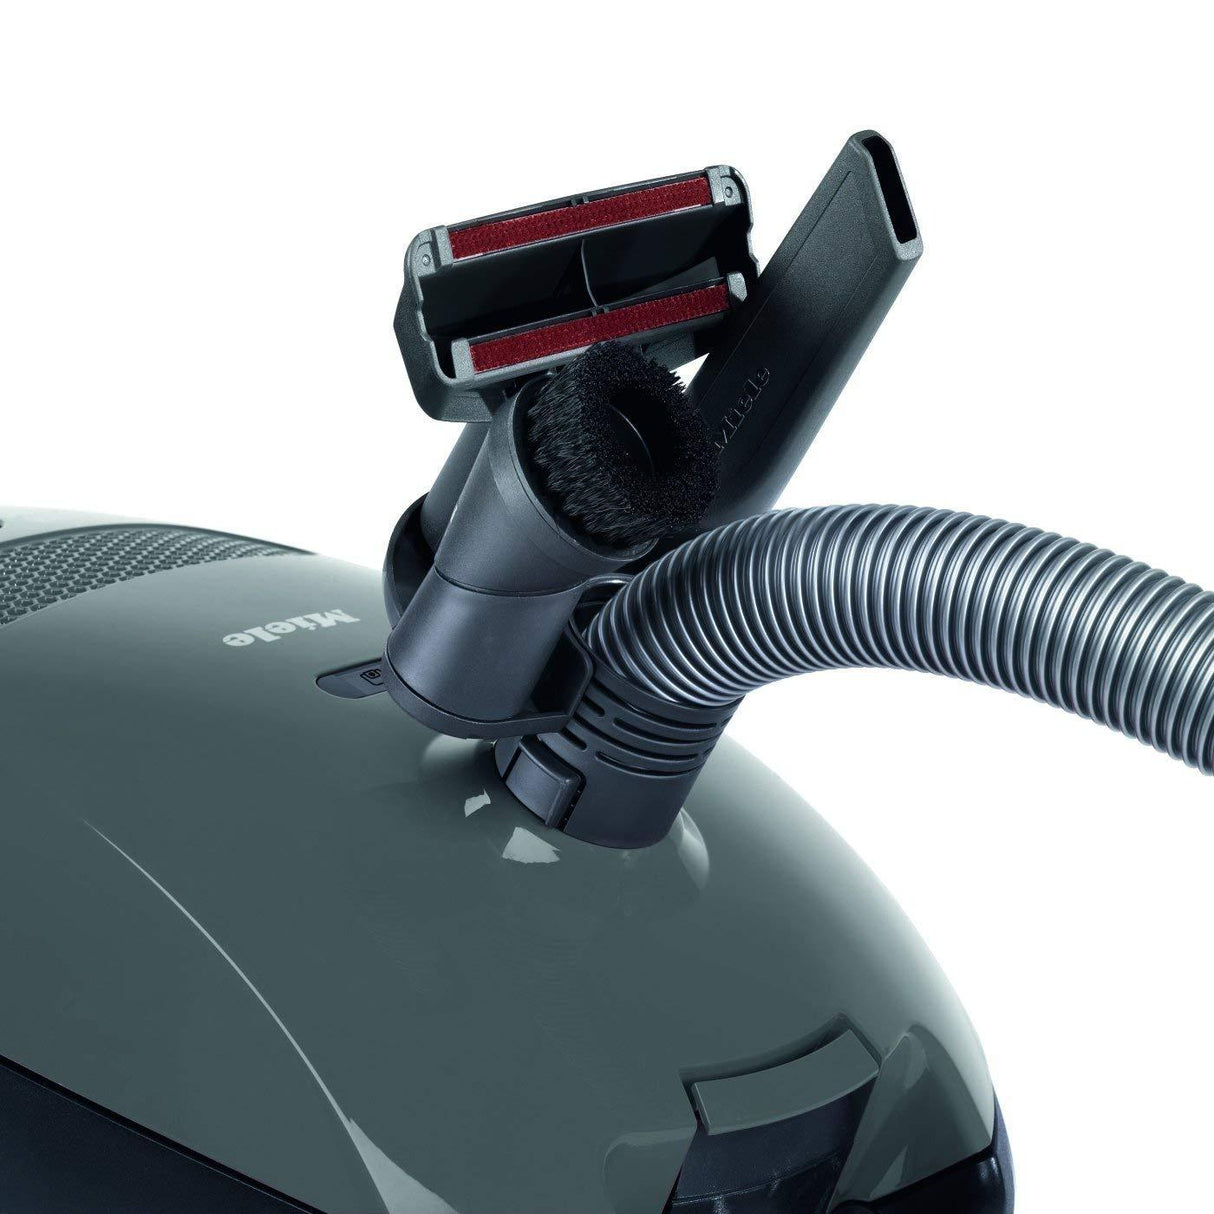 Miele Classic C1 Pure Suction Canister Vacuum Cleaner, PowerLine - Graphite grey, SKU 41BAN045USA - Appliance Genie